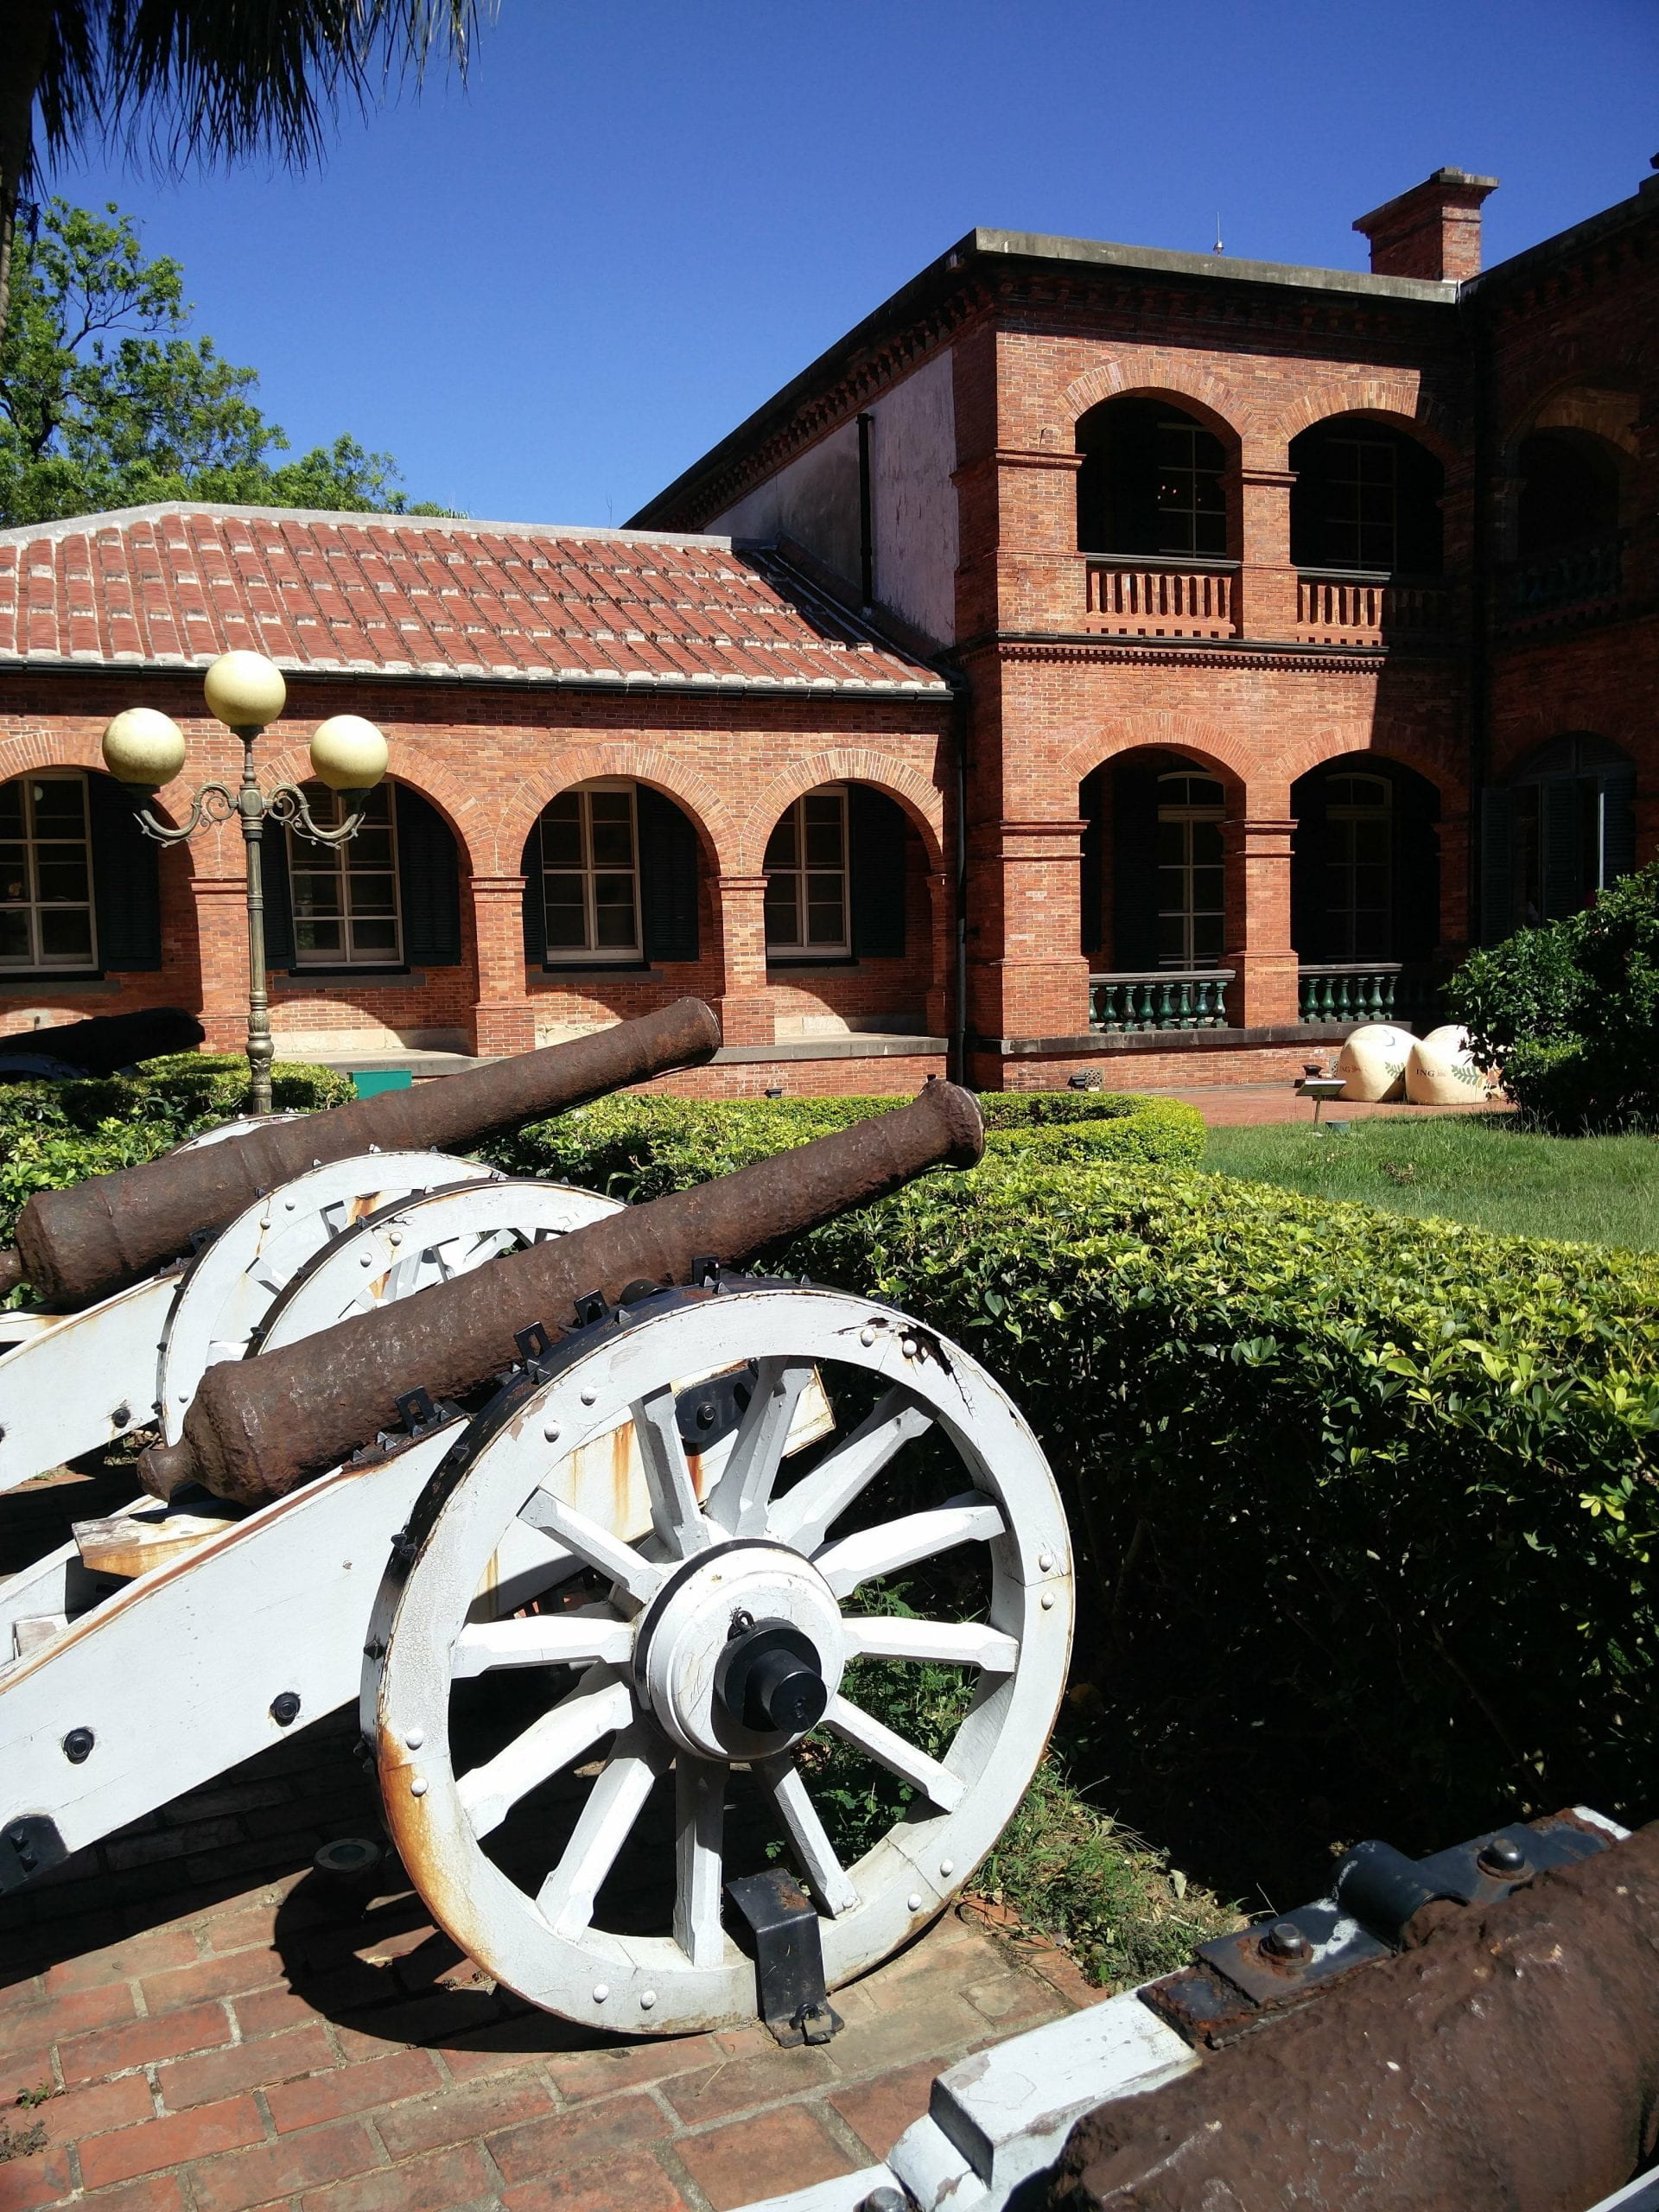 18th century cannons on display outside the former British Consulate section of Fort San Domingo